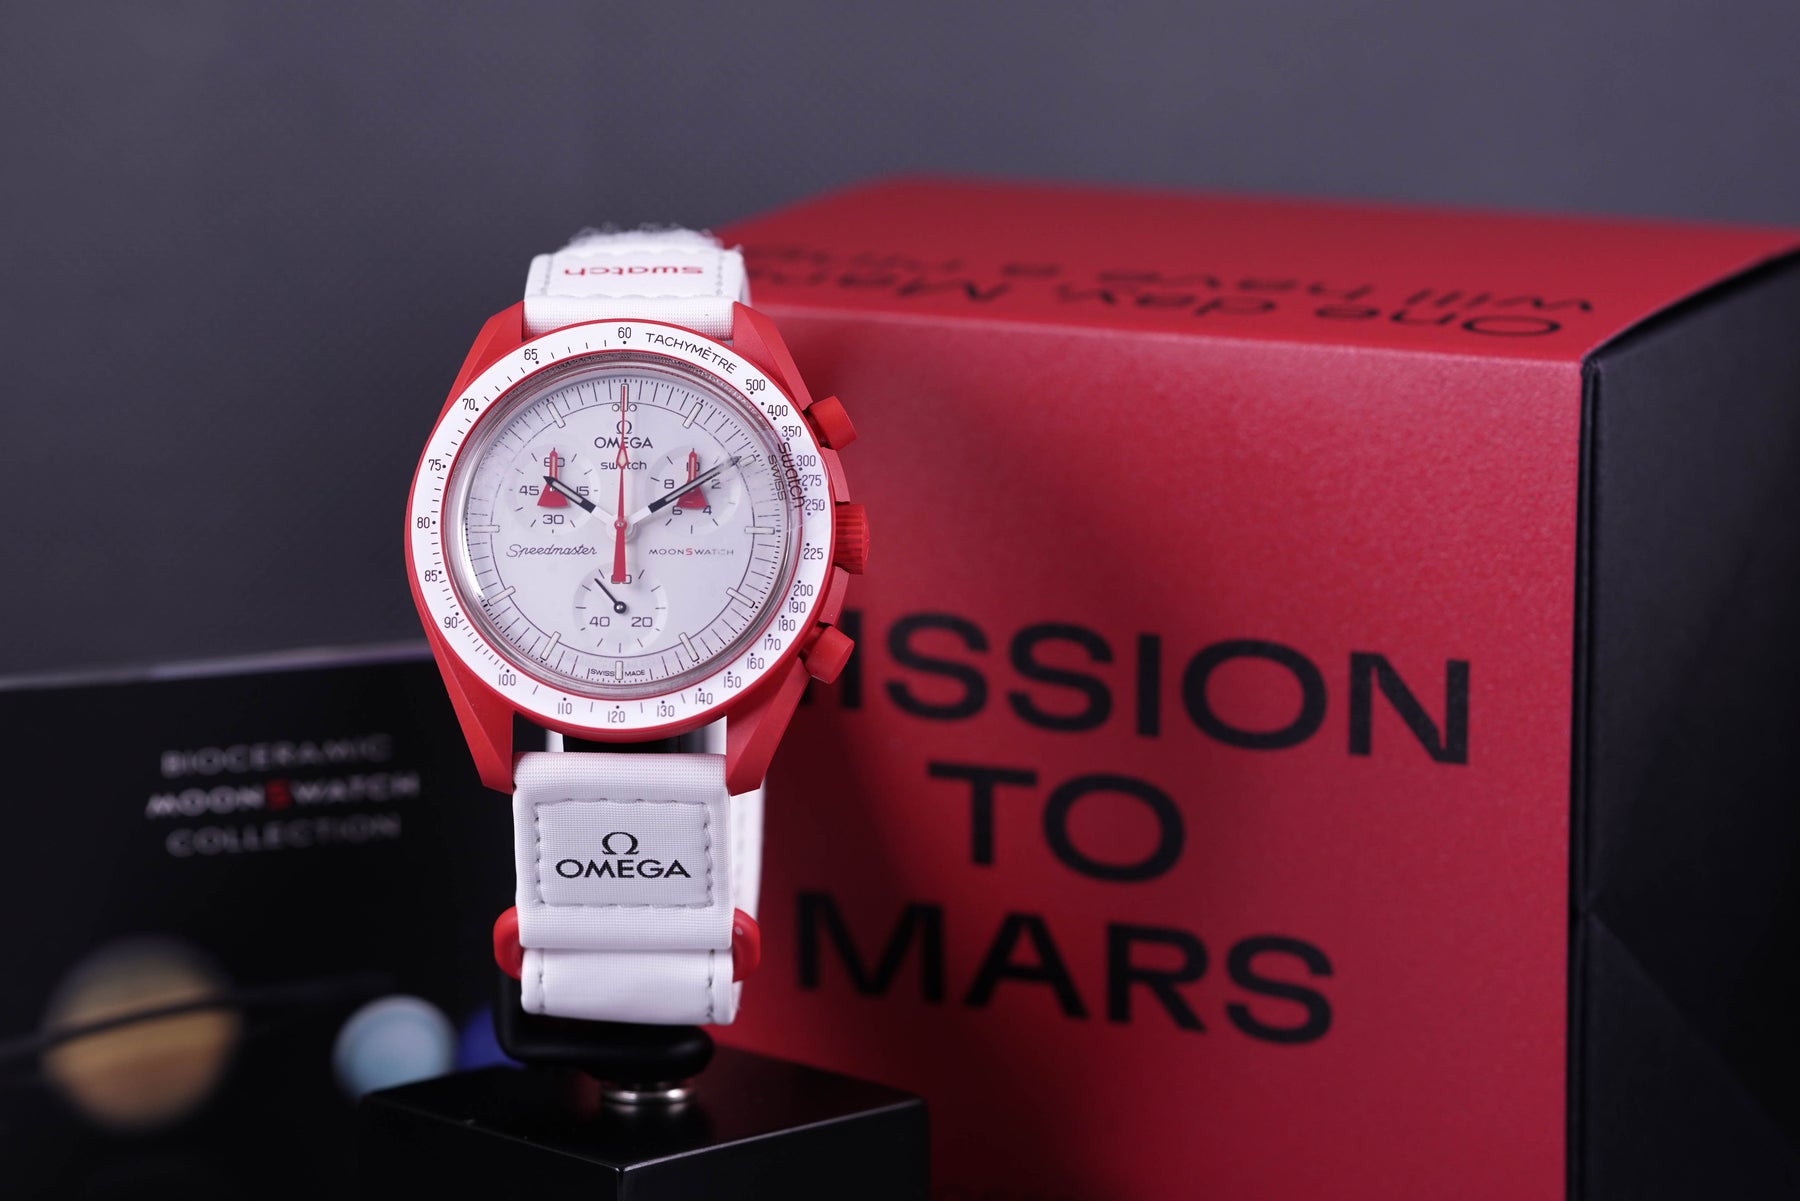 MOONSWATCH MISSION TO MARS